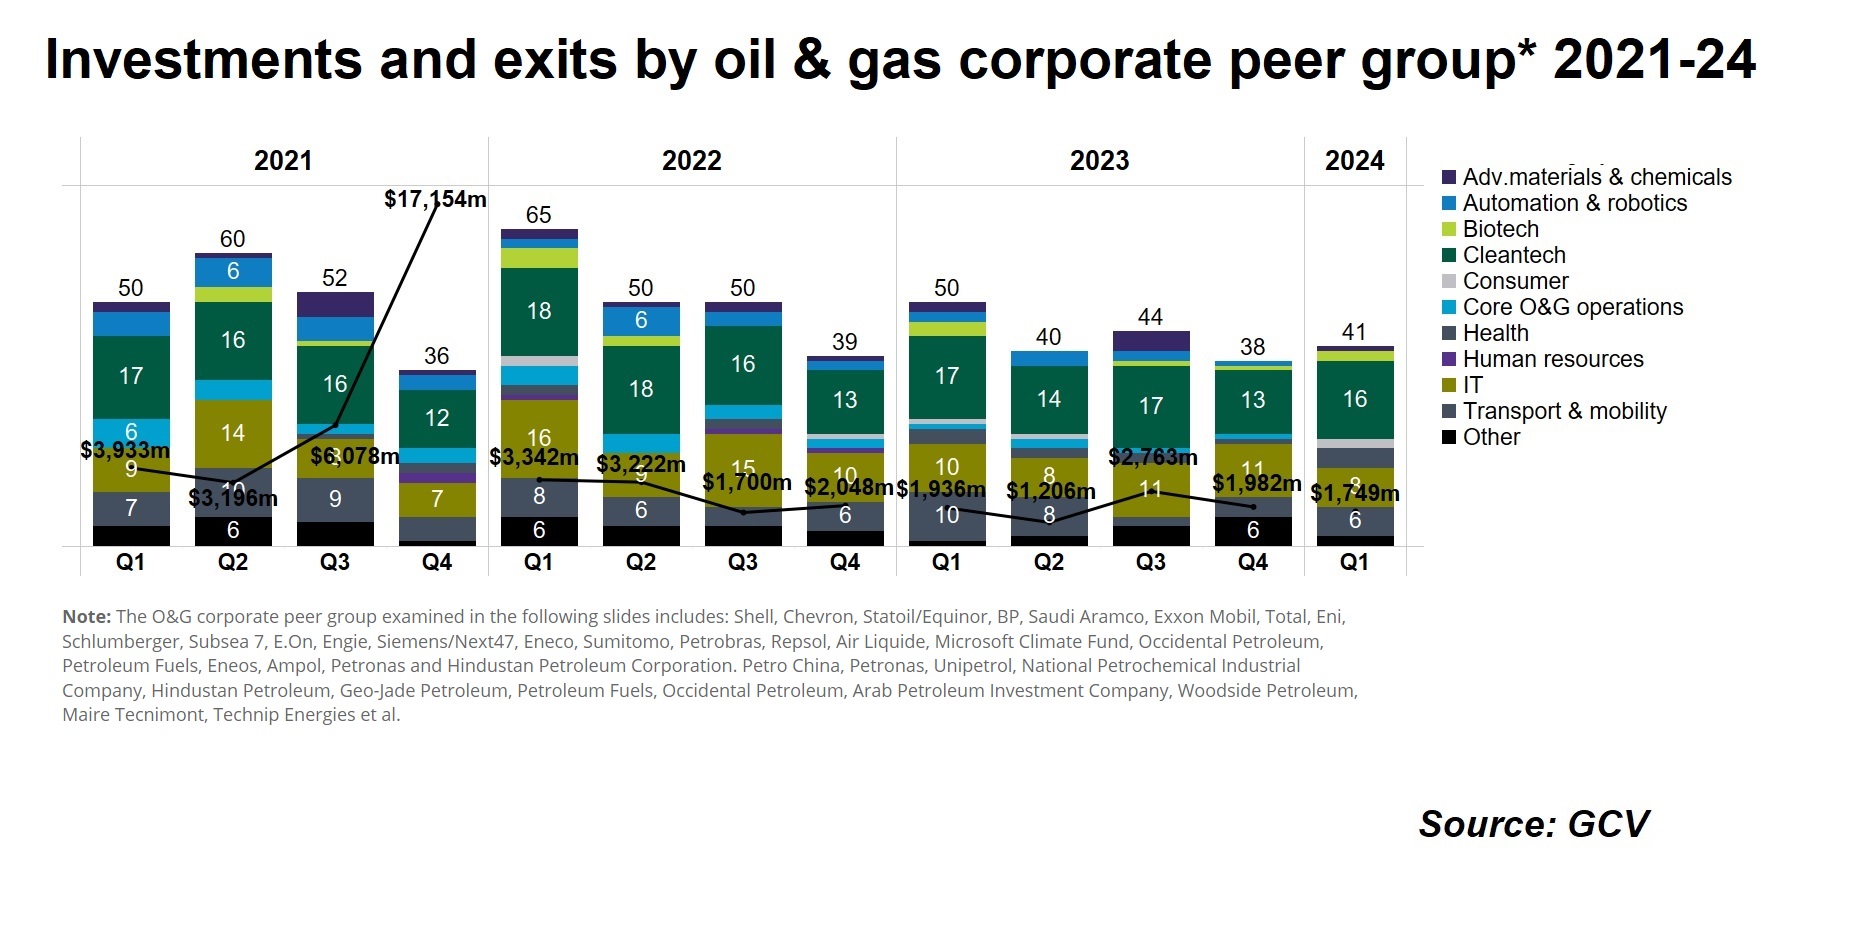 Investments and exits by oil & gas corporate peer group by quarter 2021-24. Source: GCV